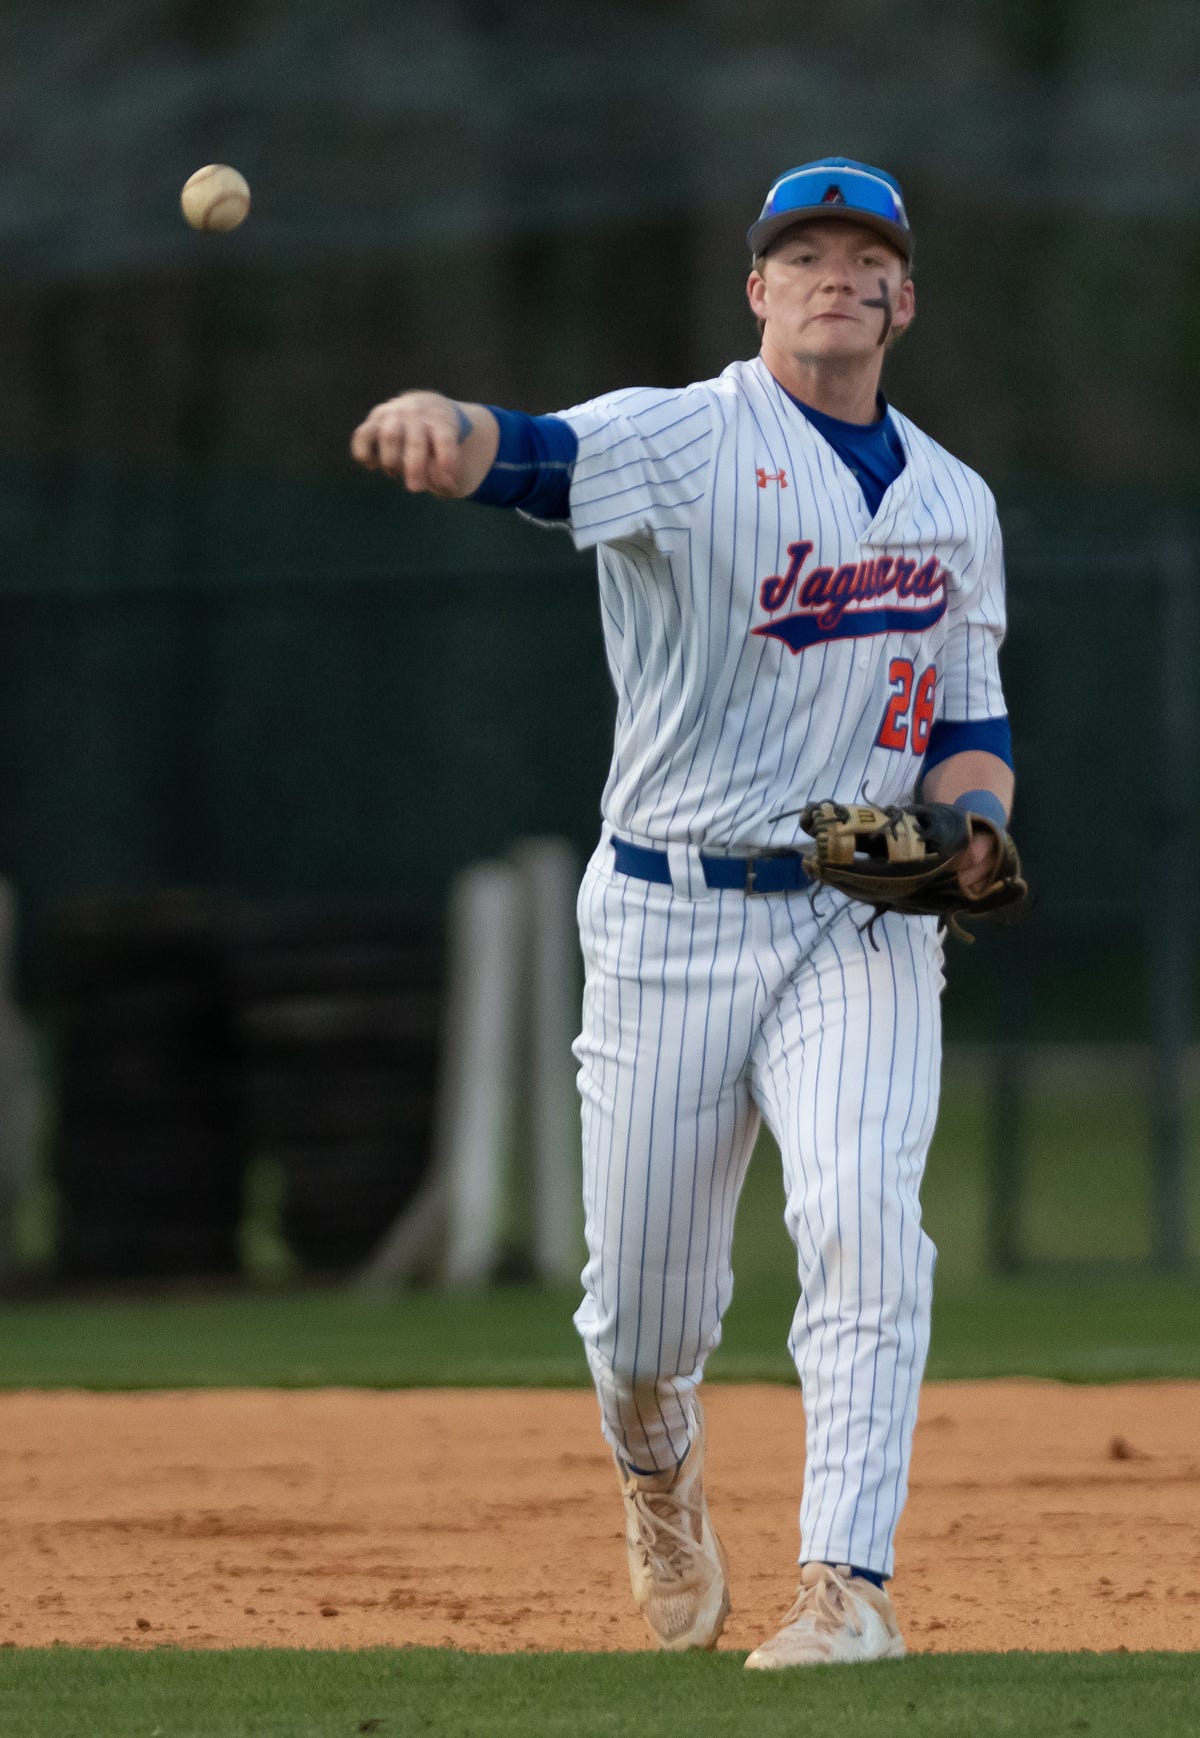 Mississippi High School Baseball Player of the Year: Exceptional Stats of Top Contenders